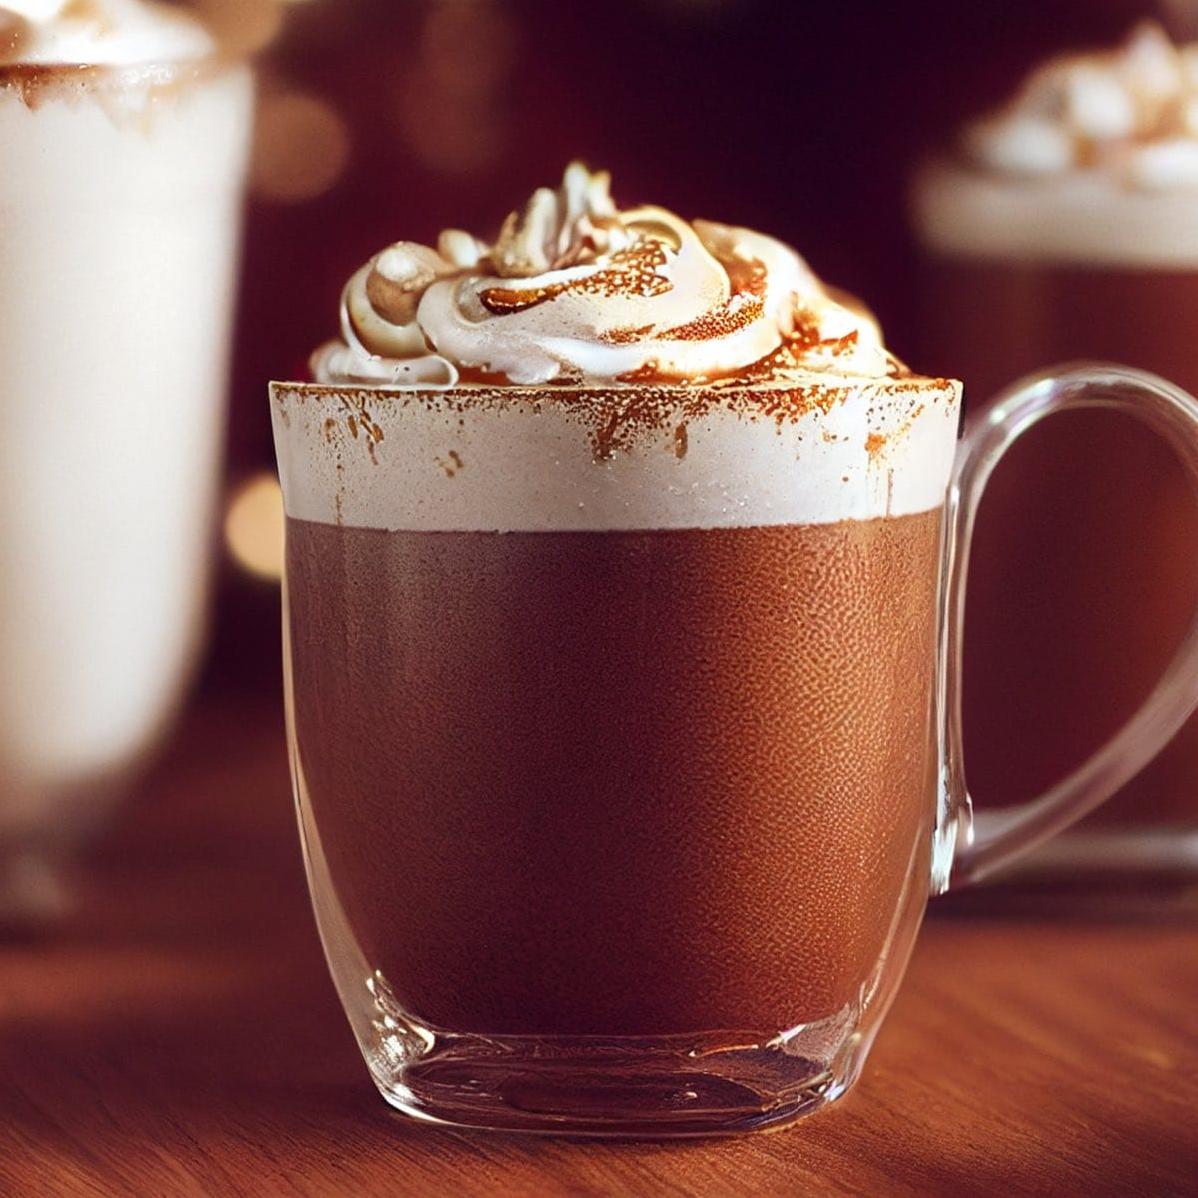  Warm up your soul with a K-Cup gingerbread latte.